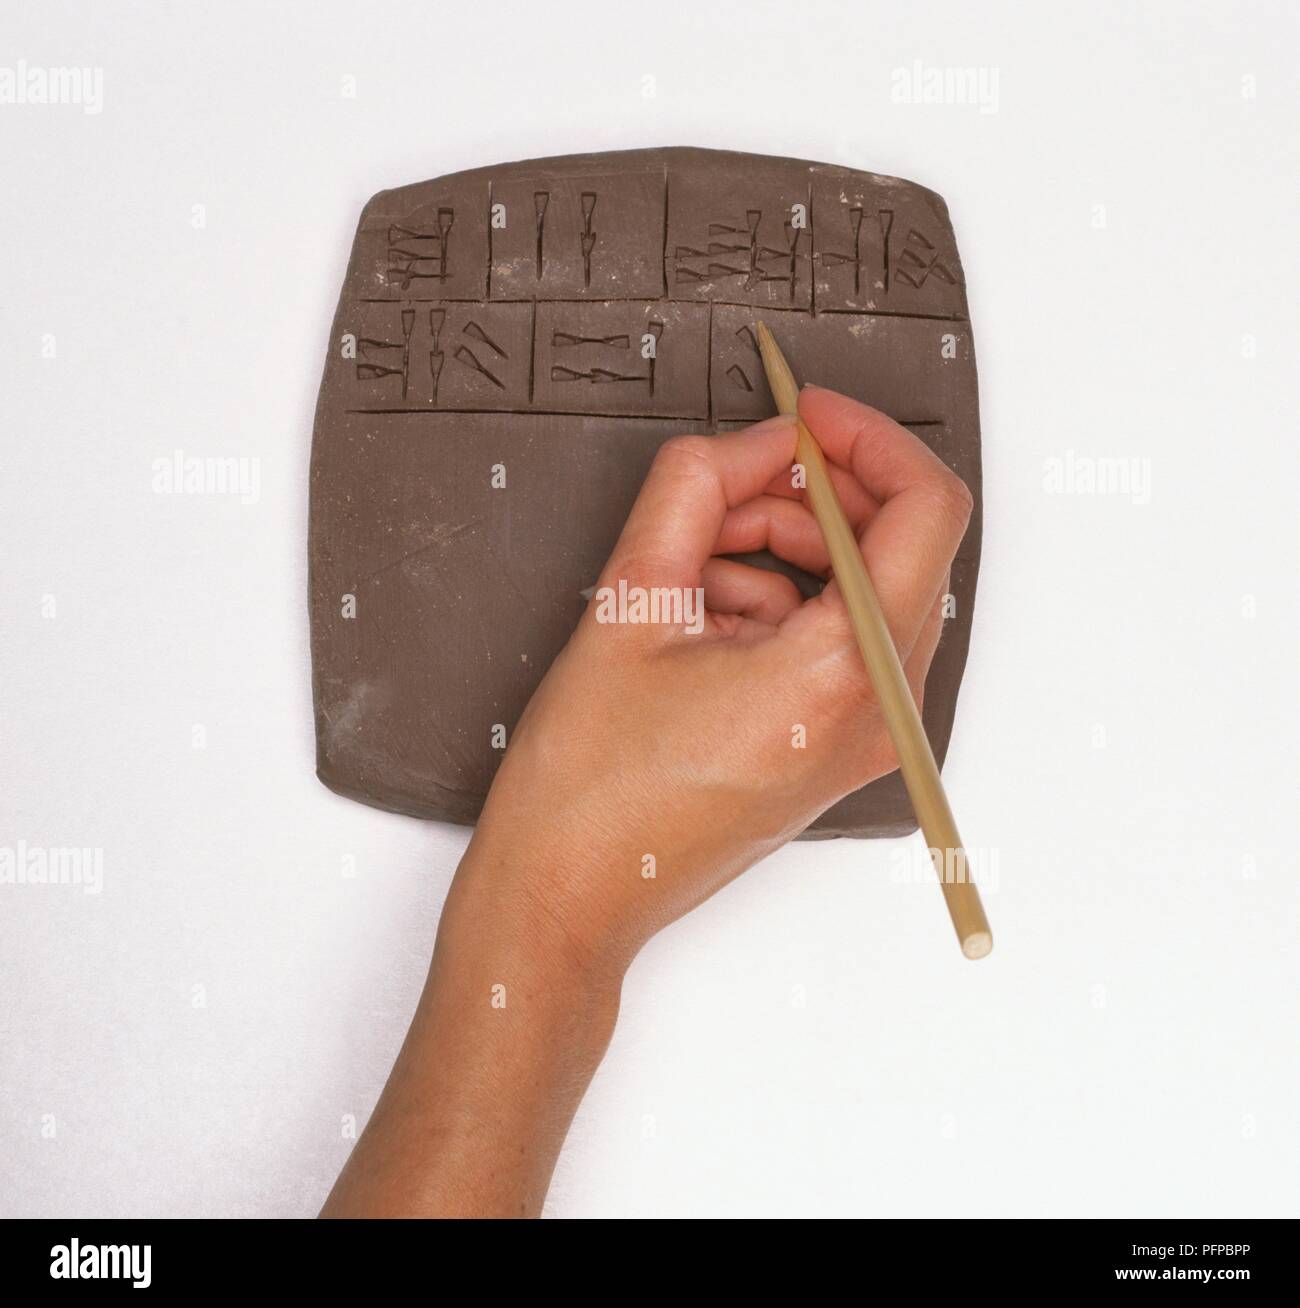 Hand using a pointed reed to write cuneiform script on slab of clay, close-up Stock Photo